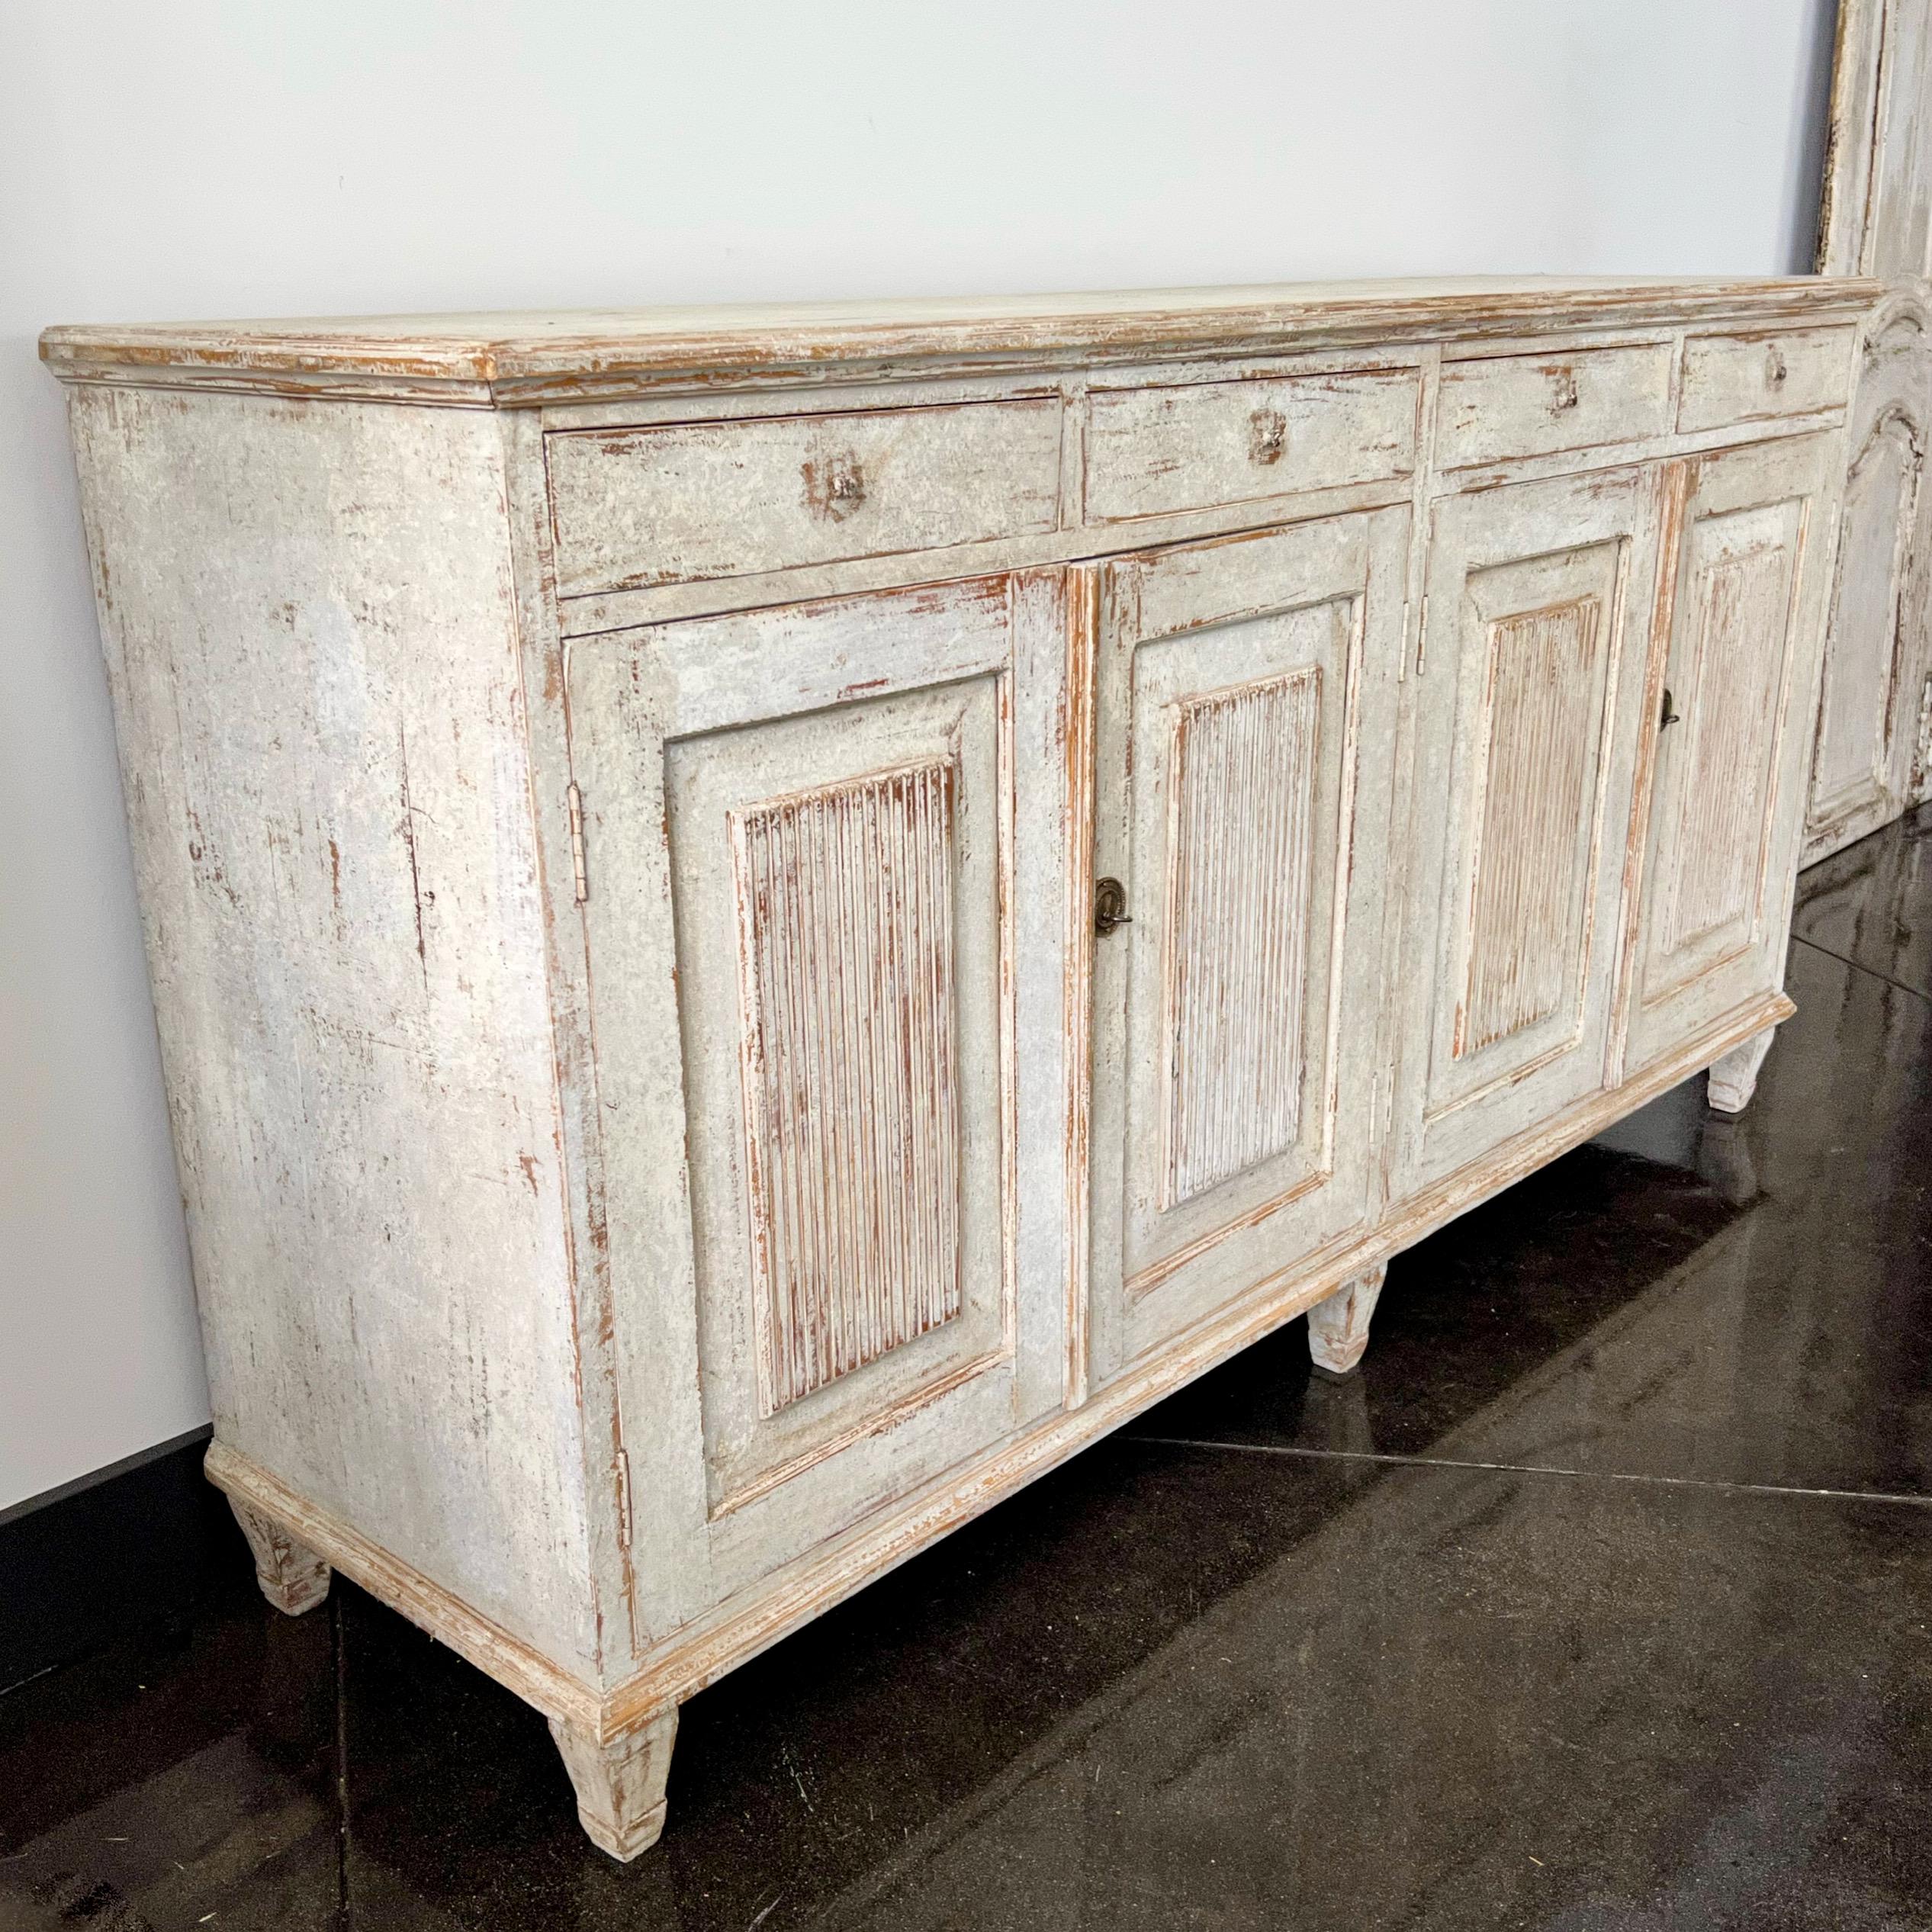 A rare four door Swedish sideboard in the classic Gustavian Style with carved reeded panel doors and bank of four drawers.
Sweden, circa 1800.